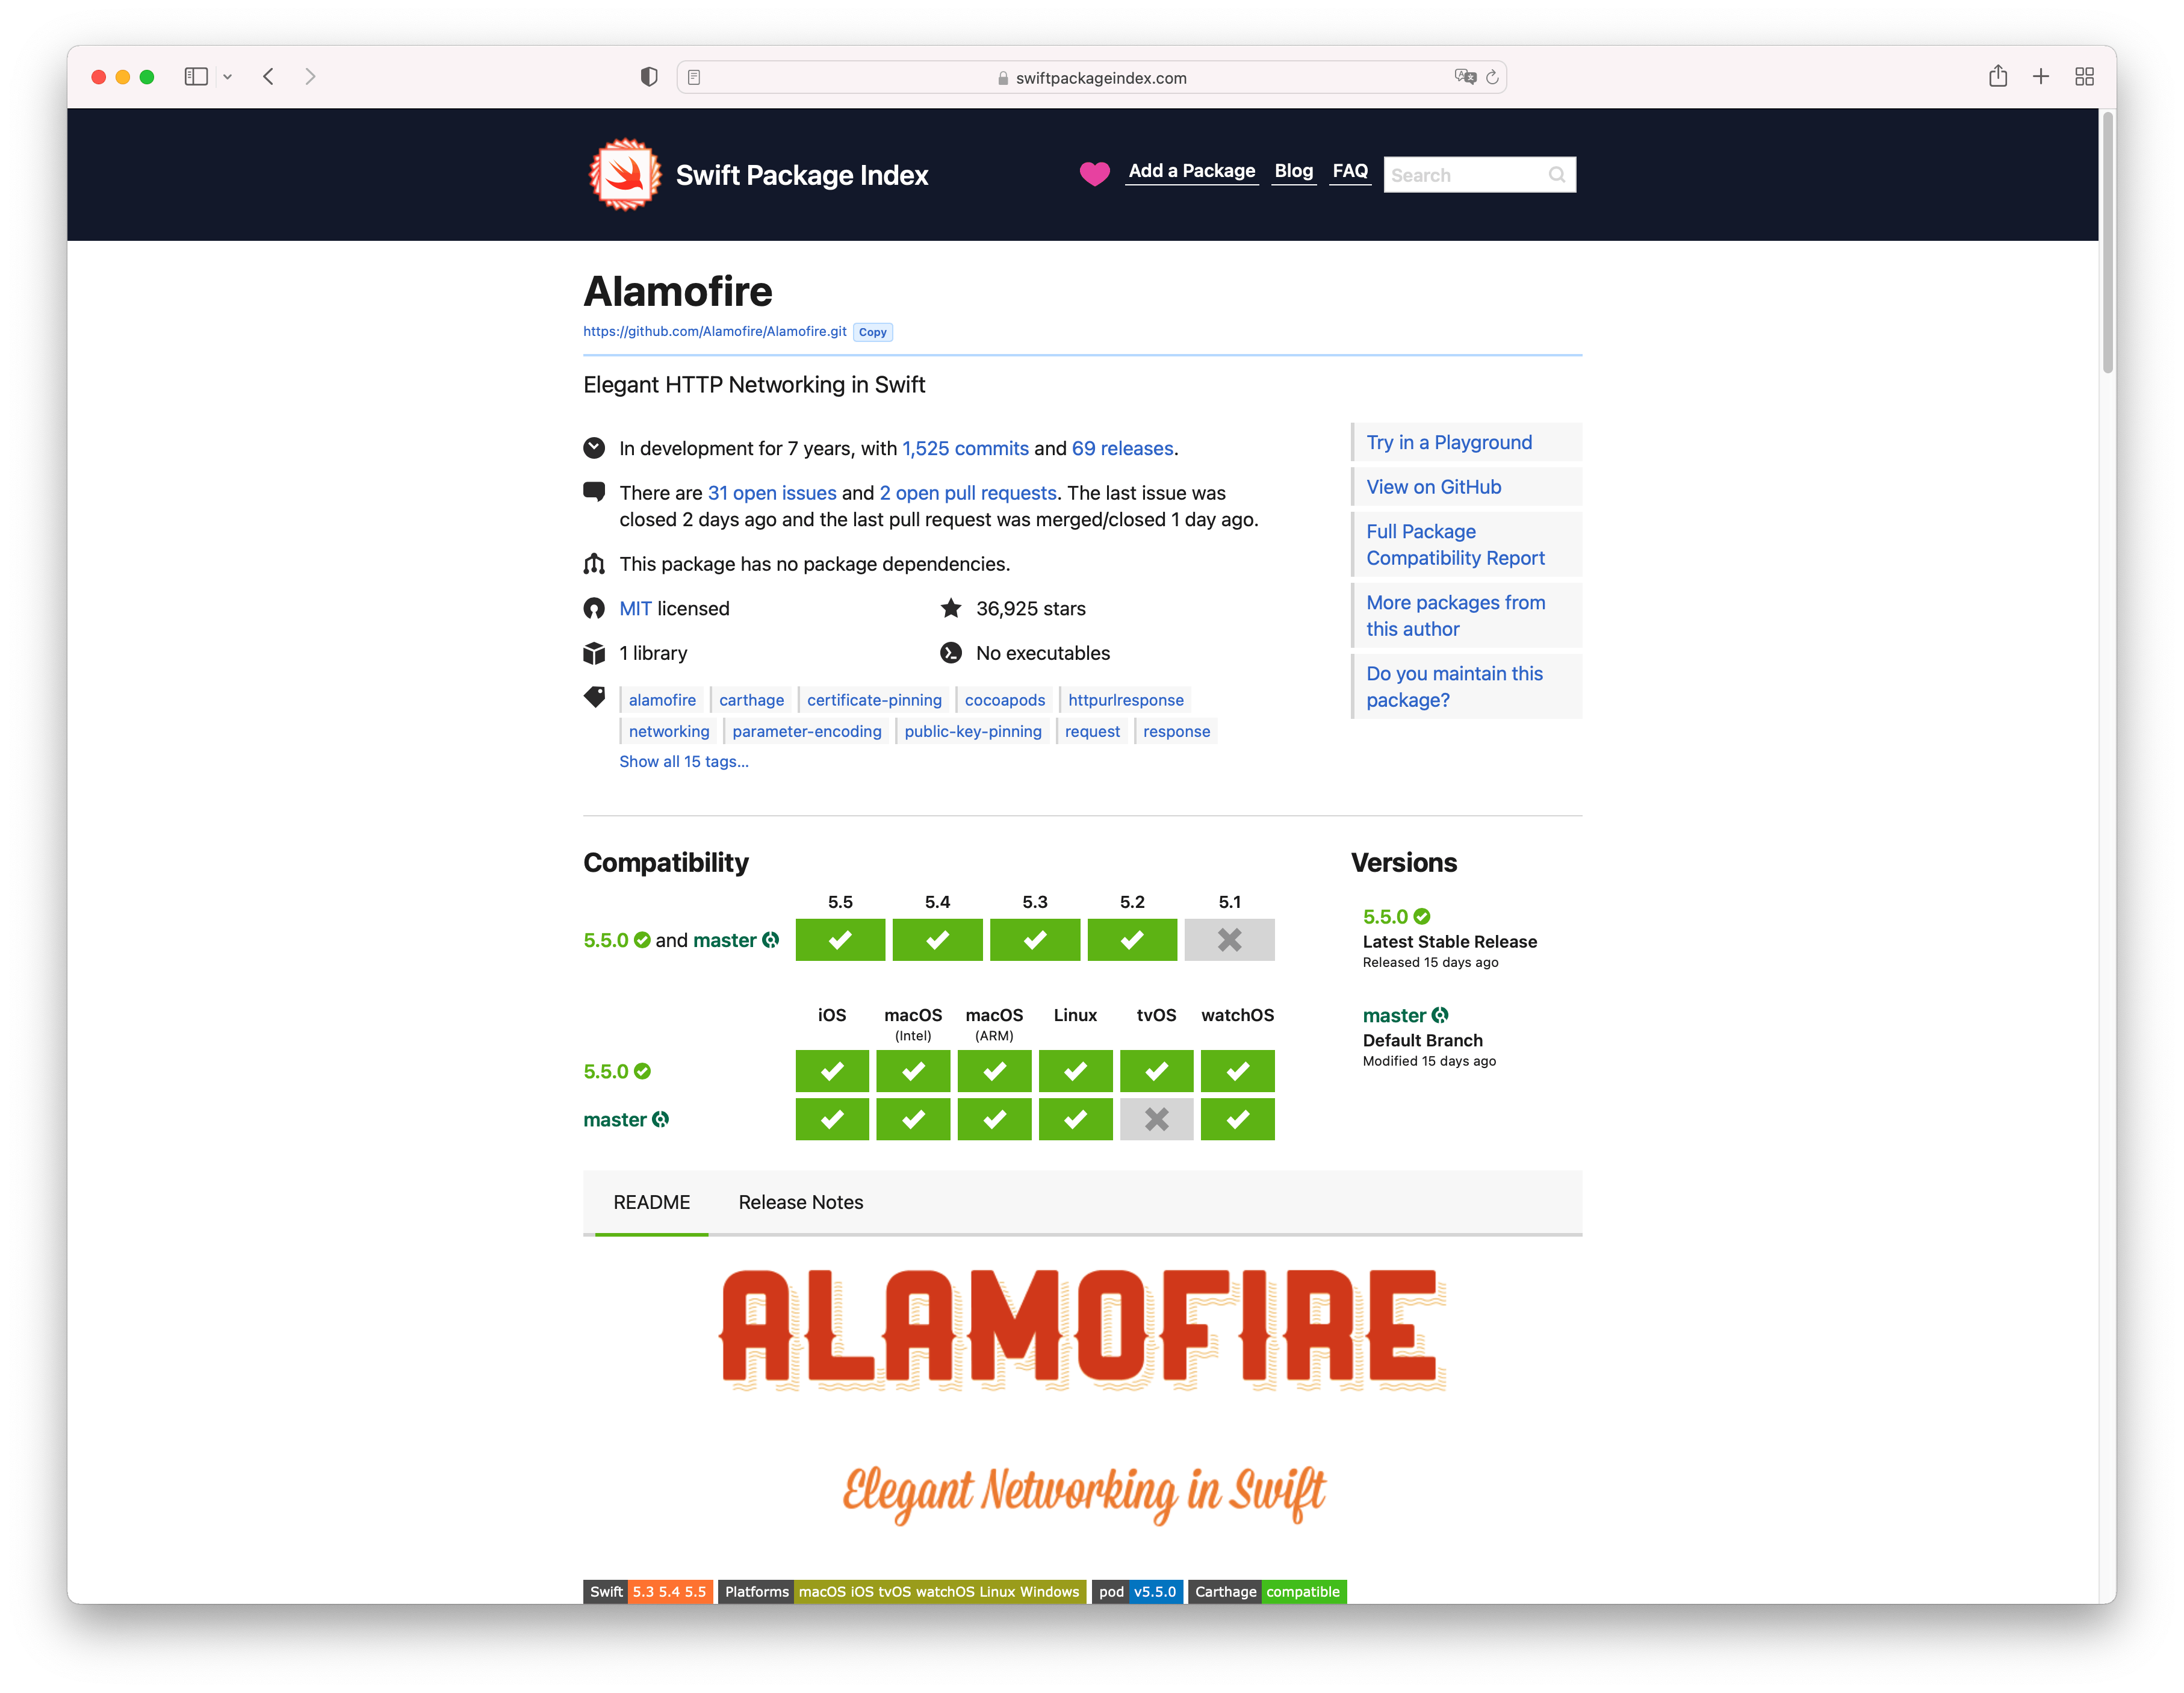 Alamofire package shown on Swift Package Index